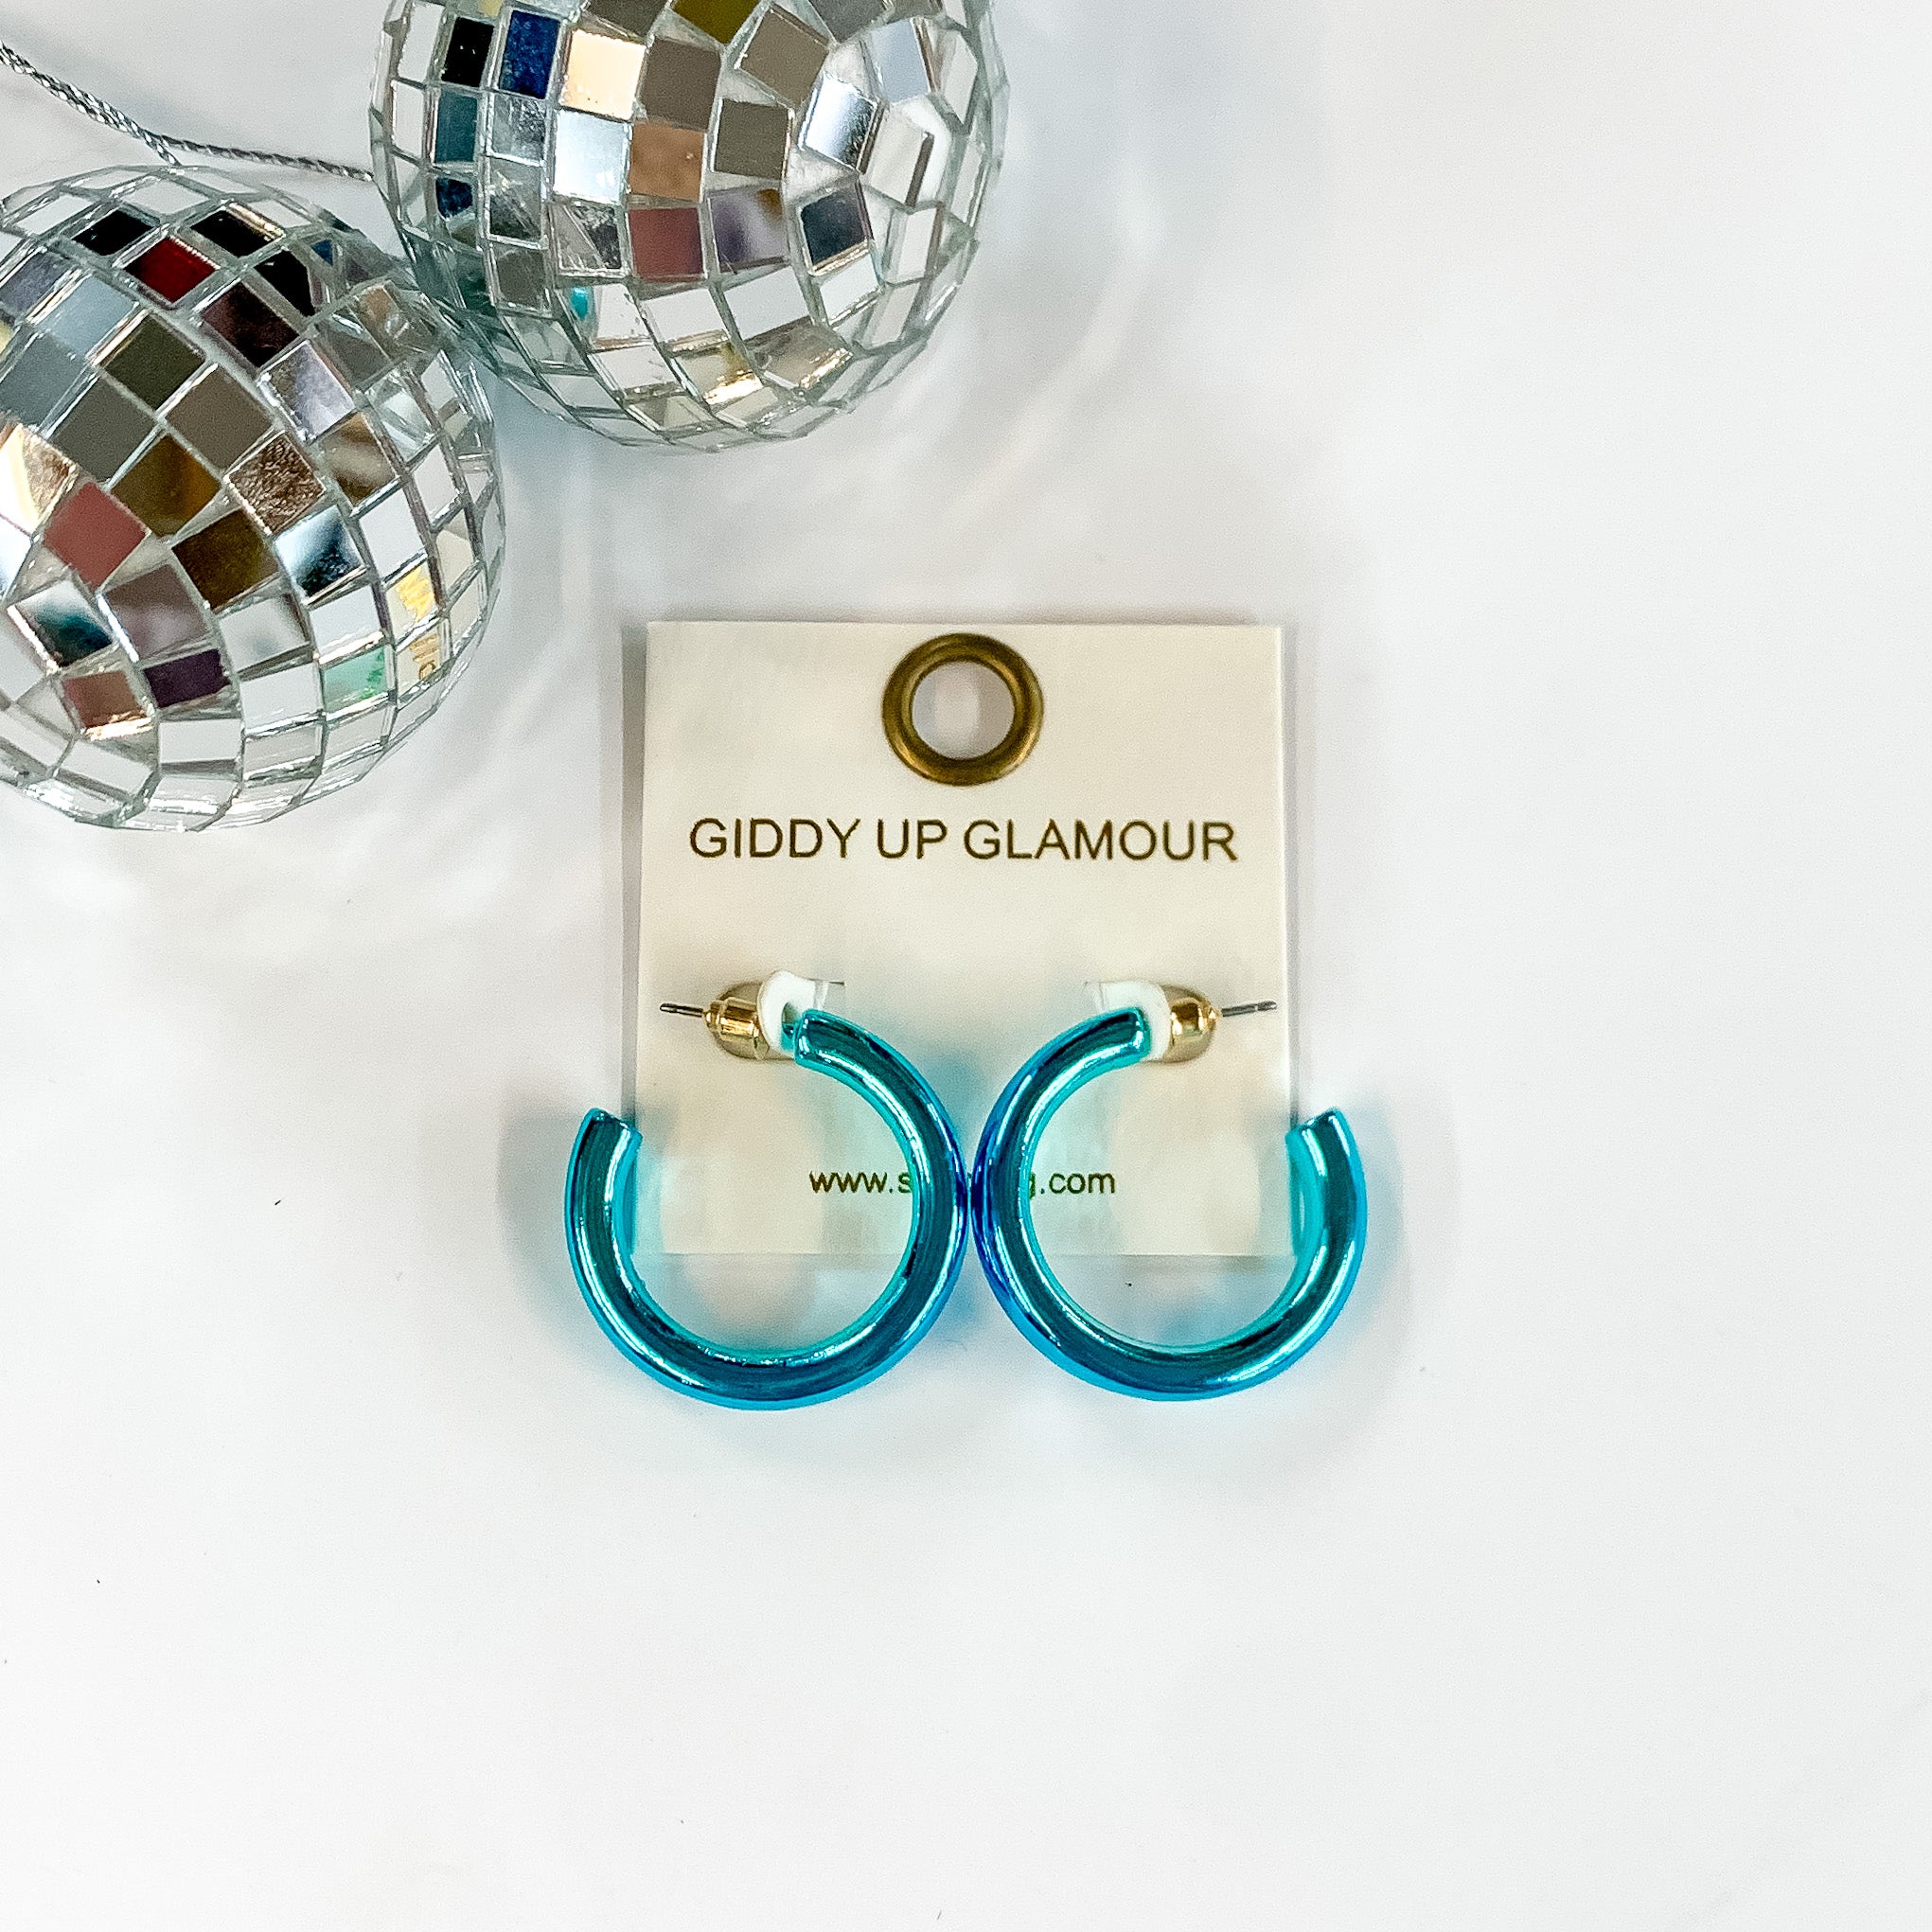 Light Up Small Neon Hoop Earrings In Blue. Pictured on a white background with disco balls in the top left corner.